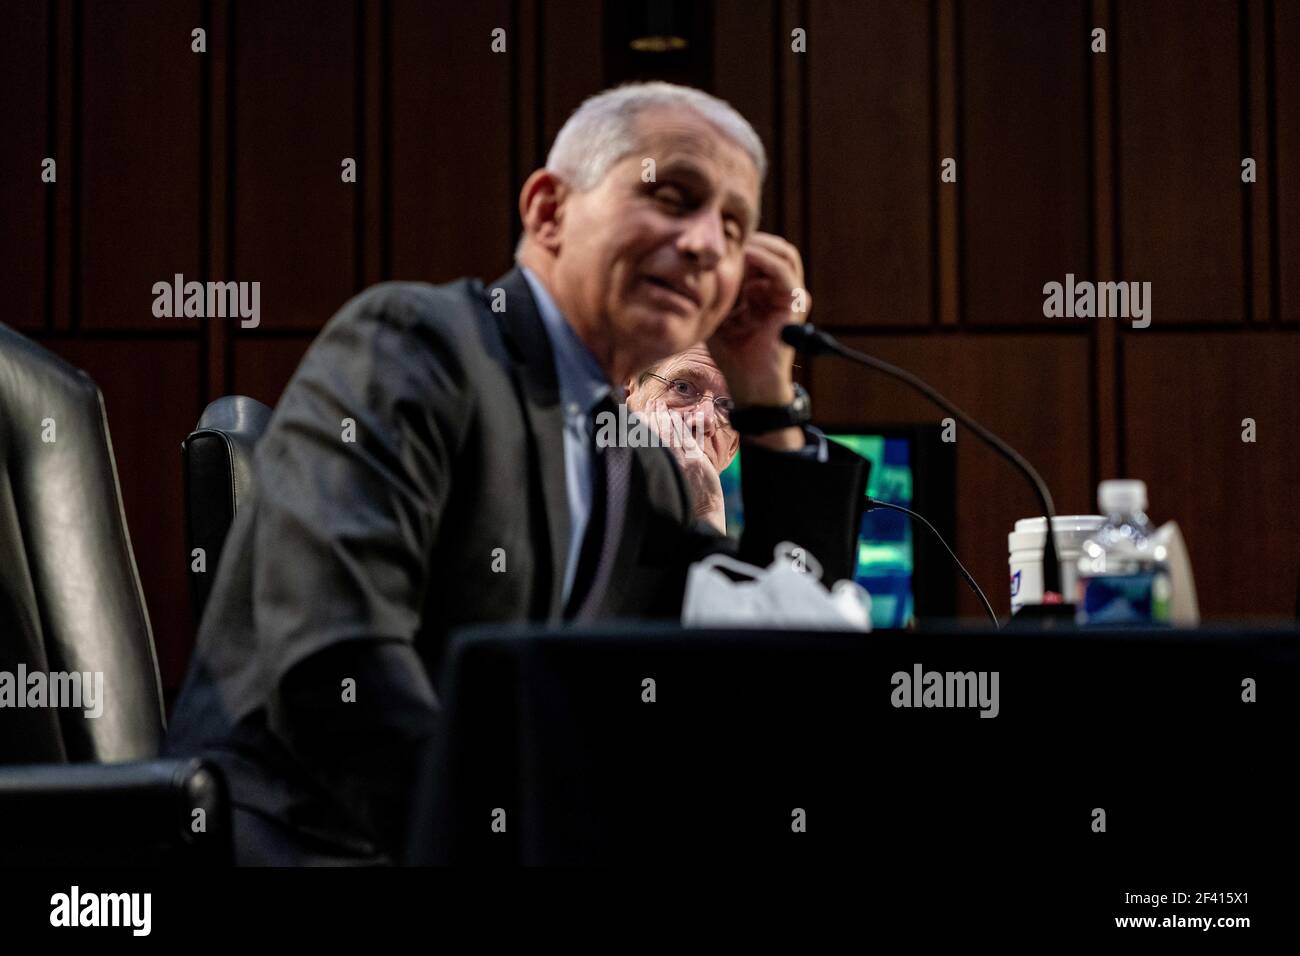 Washington, USA. 18th Mar, 2021. Dr. David Kessler, Chief Science Officer of the White House COVID-19 Response Team, listens during a hearing, with the Senate Committee on Health, Education, Labor, and Pensions, on the Covid-19 response, on Capitol Hill in Washington March 18th, 2021. (Photo by Anna Moneymaker/Pool/Sipa USA) Credit: Sipa USA/Alamy Live News Stock Photo